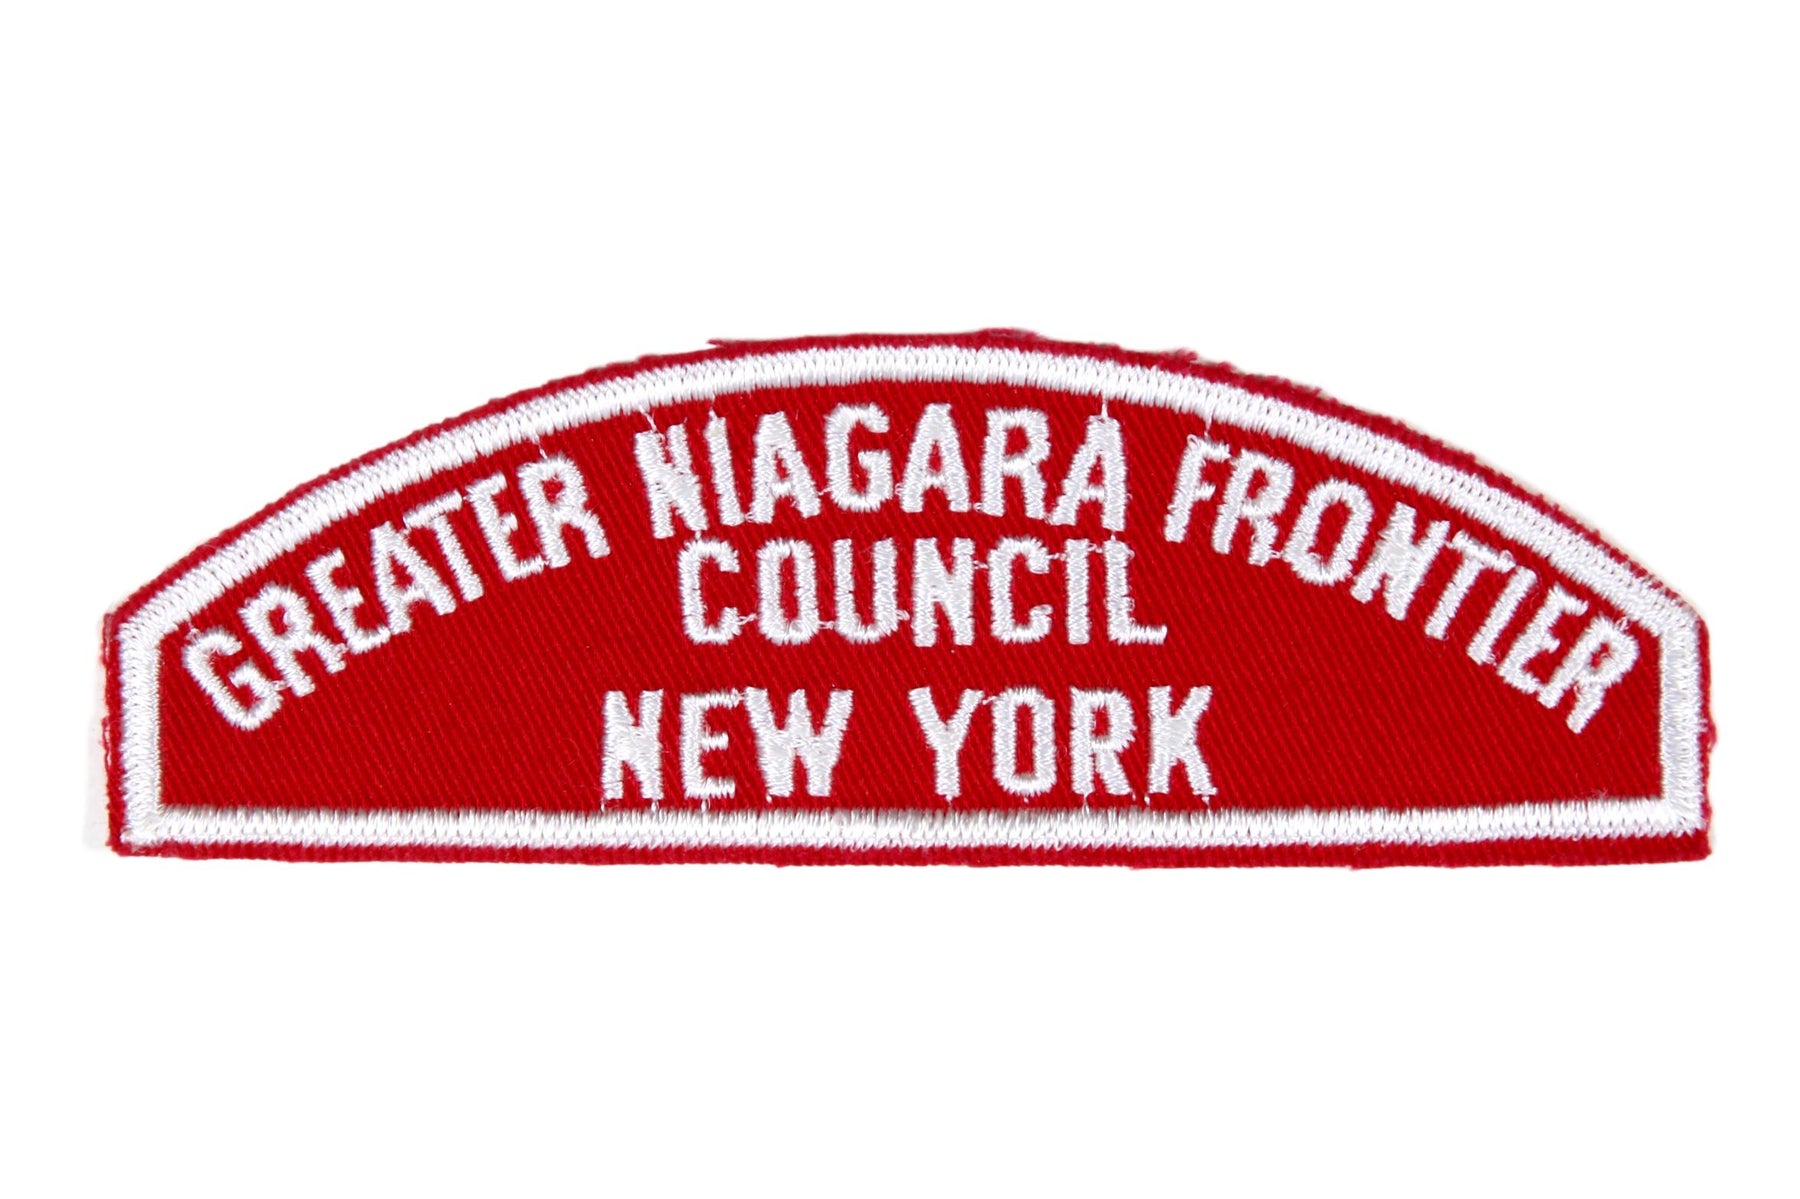 Greater Niagara Frontier Council Red and White Council Strip